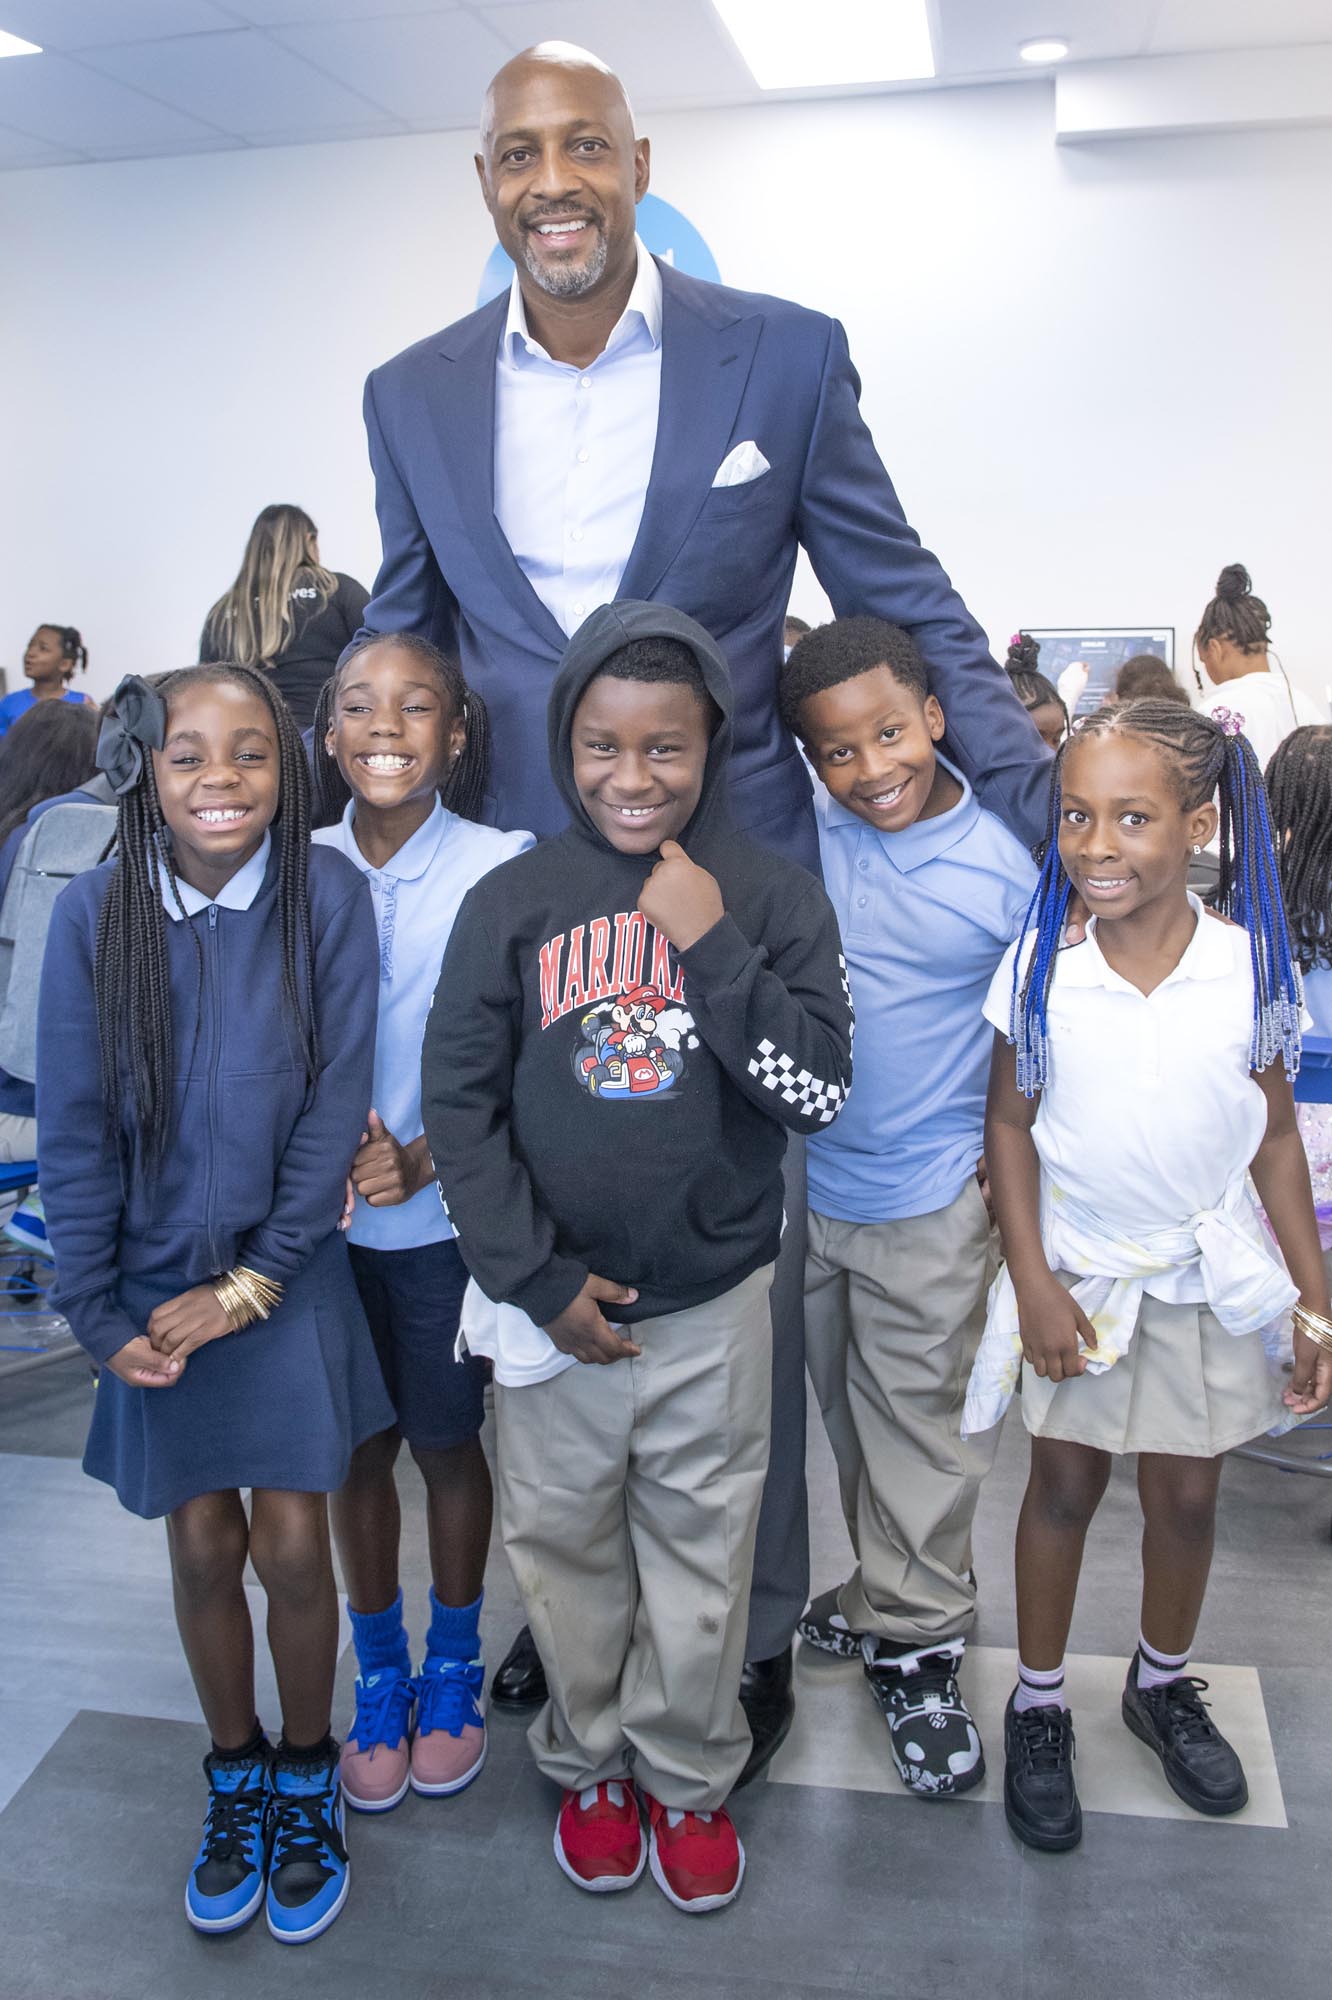 Alonzo Mourning poses for a photo with OYC children at the AT&T Connected Learning Center